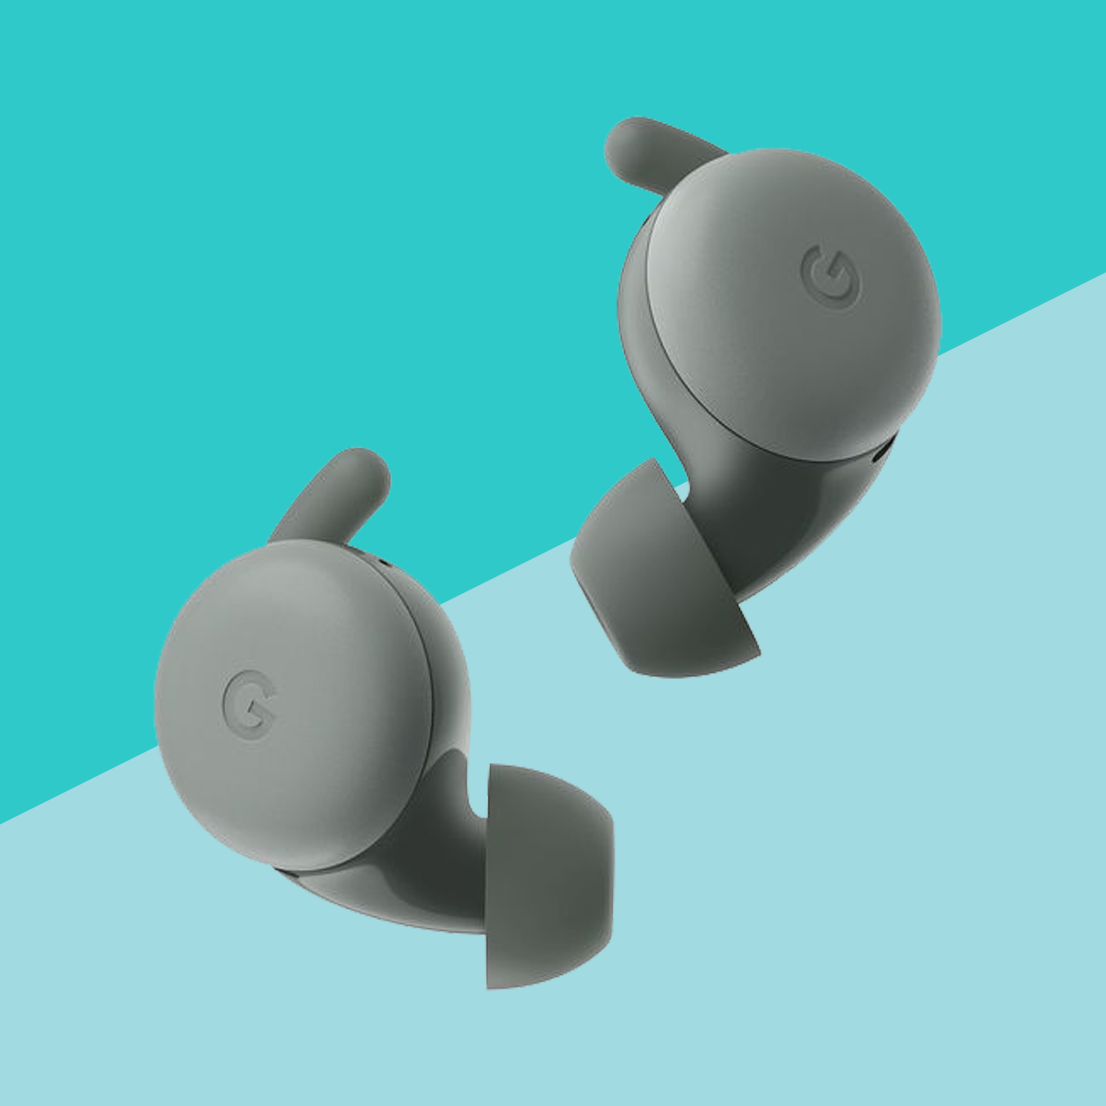 Google Pixel Buds A-Series Review: Why I Loved These $99 Earbuds